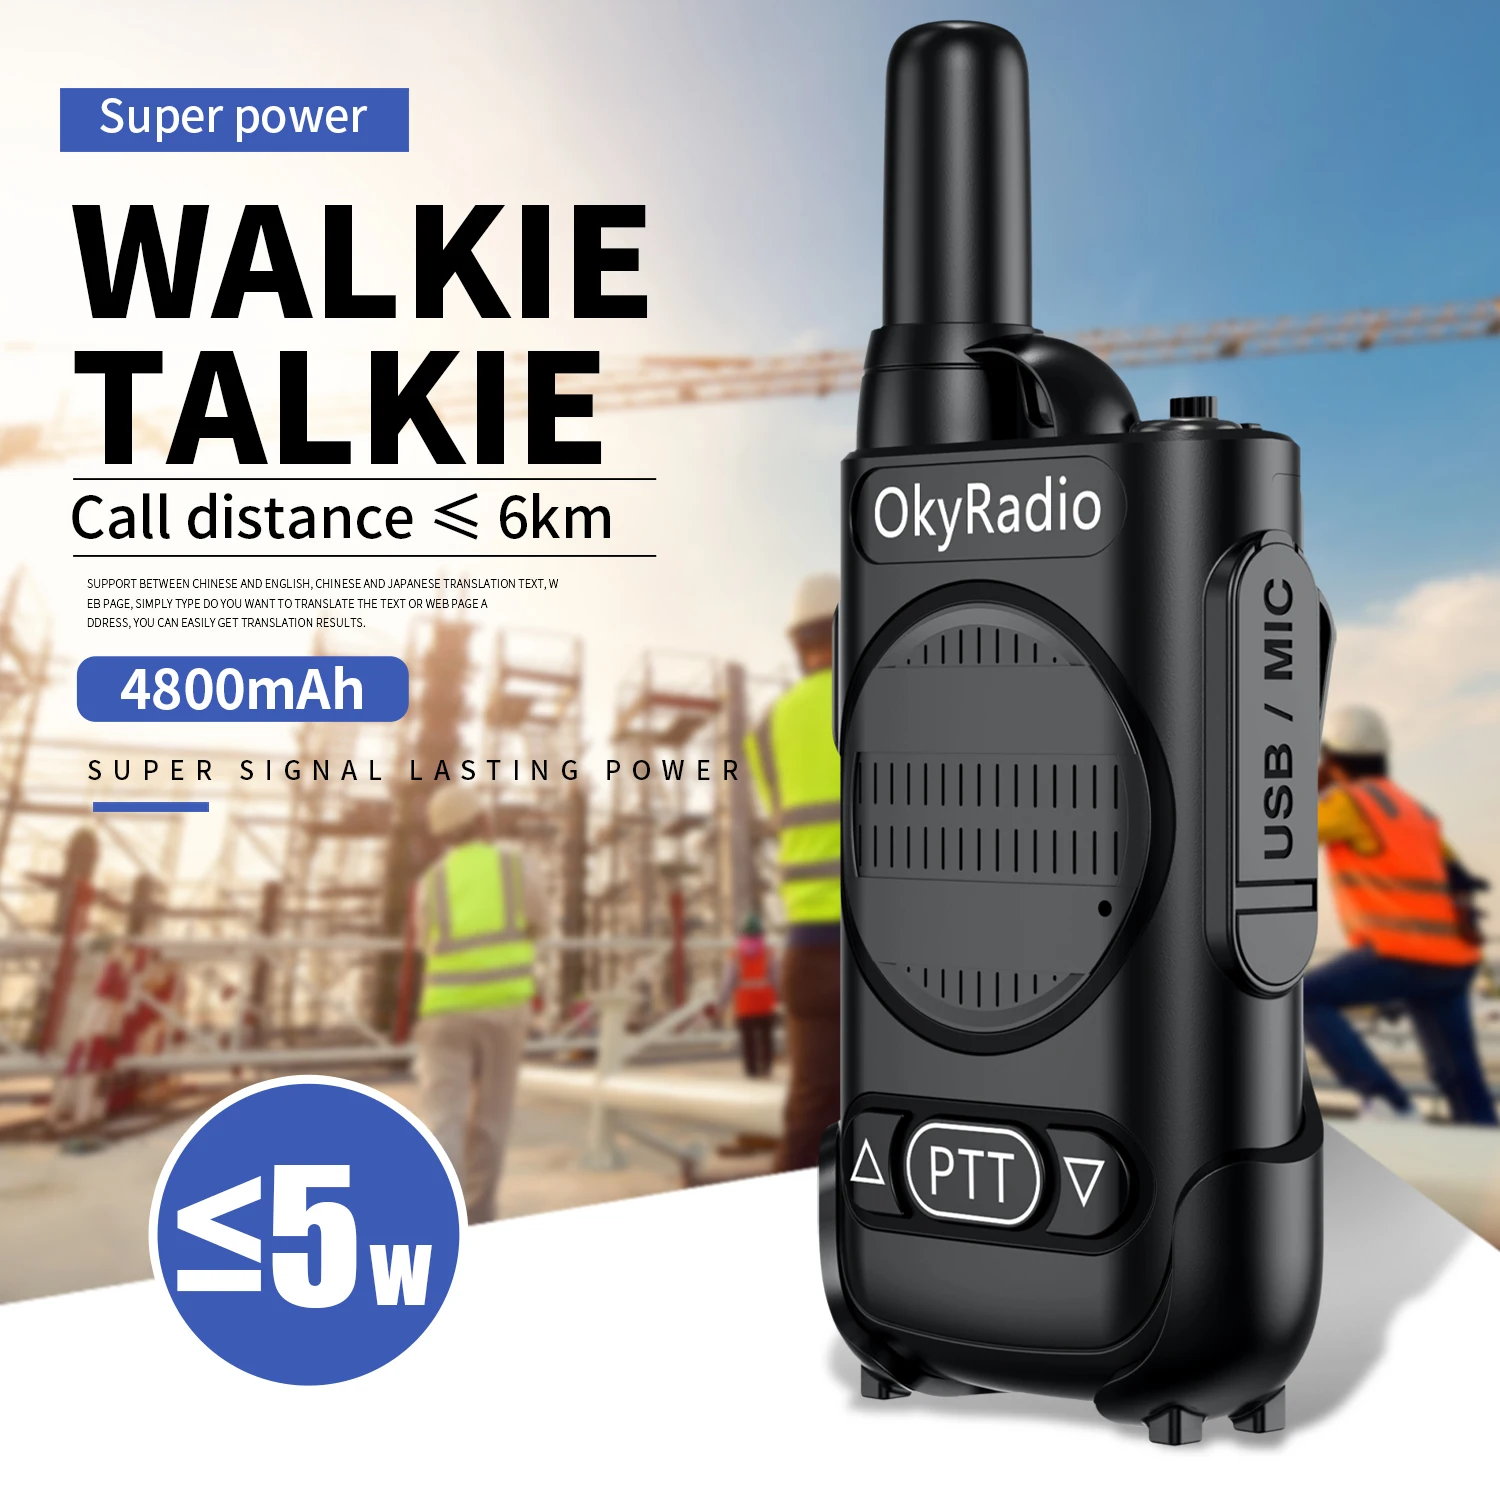 

OkyRadio 4800mah Large Capacity 5w Portable Waterproof Walkie-talkie with 6km Call Distance for Hotel Security Personnel